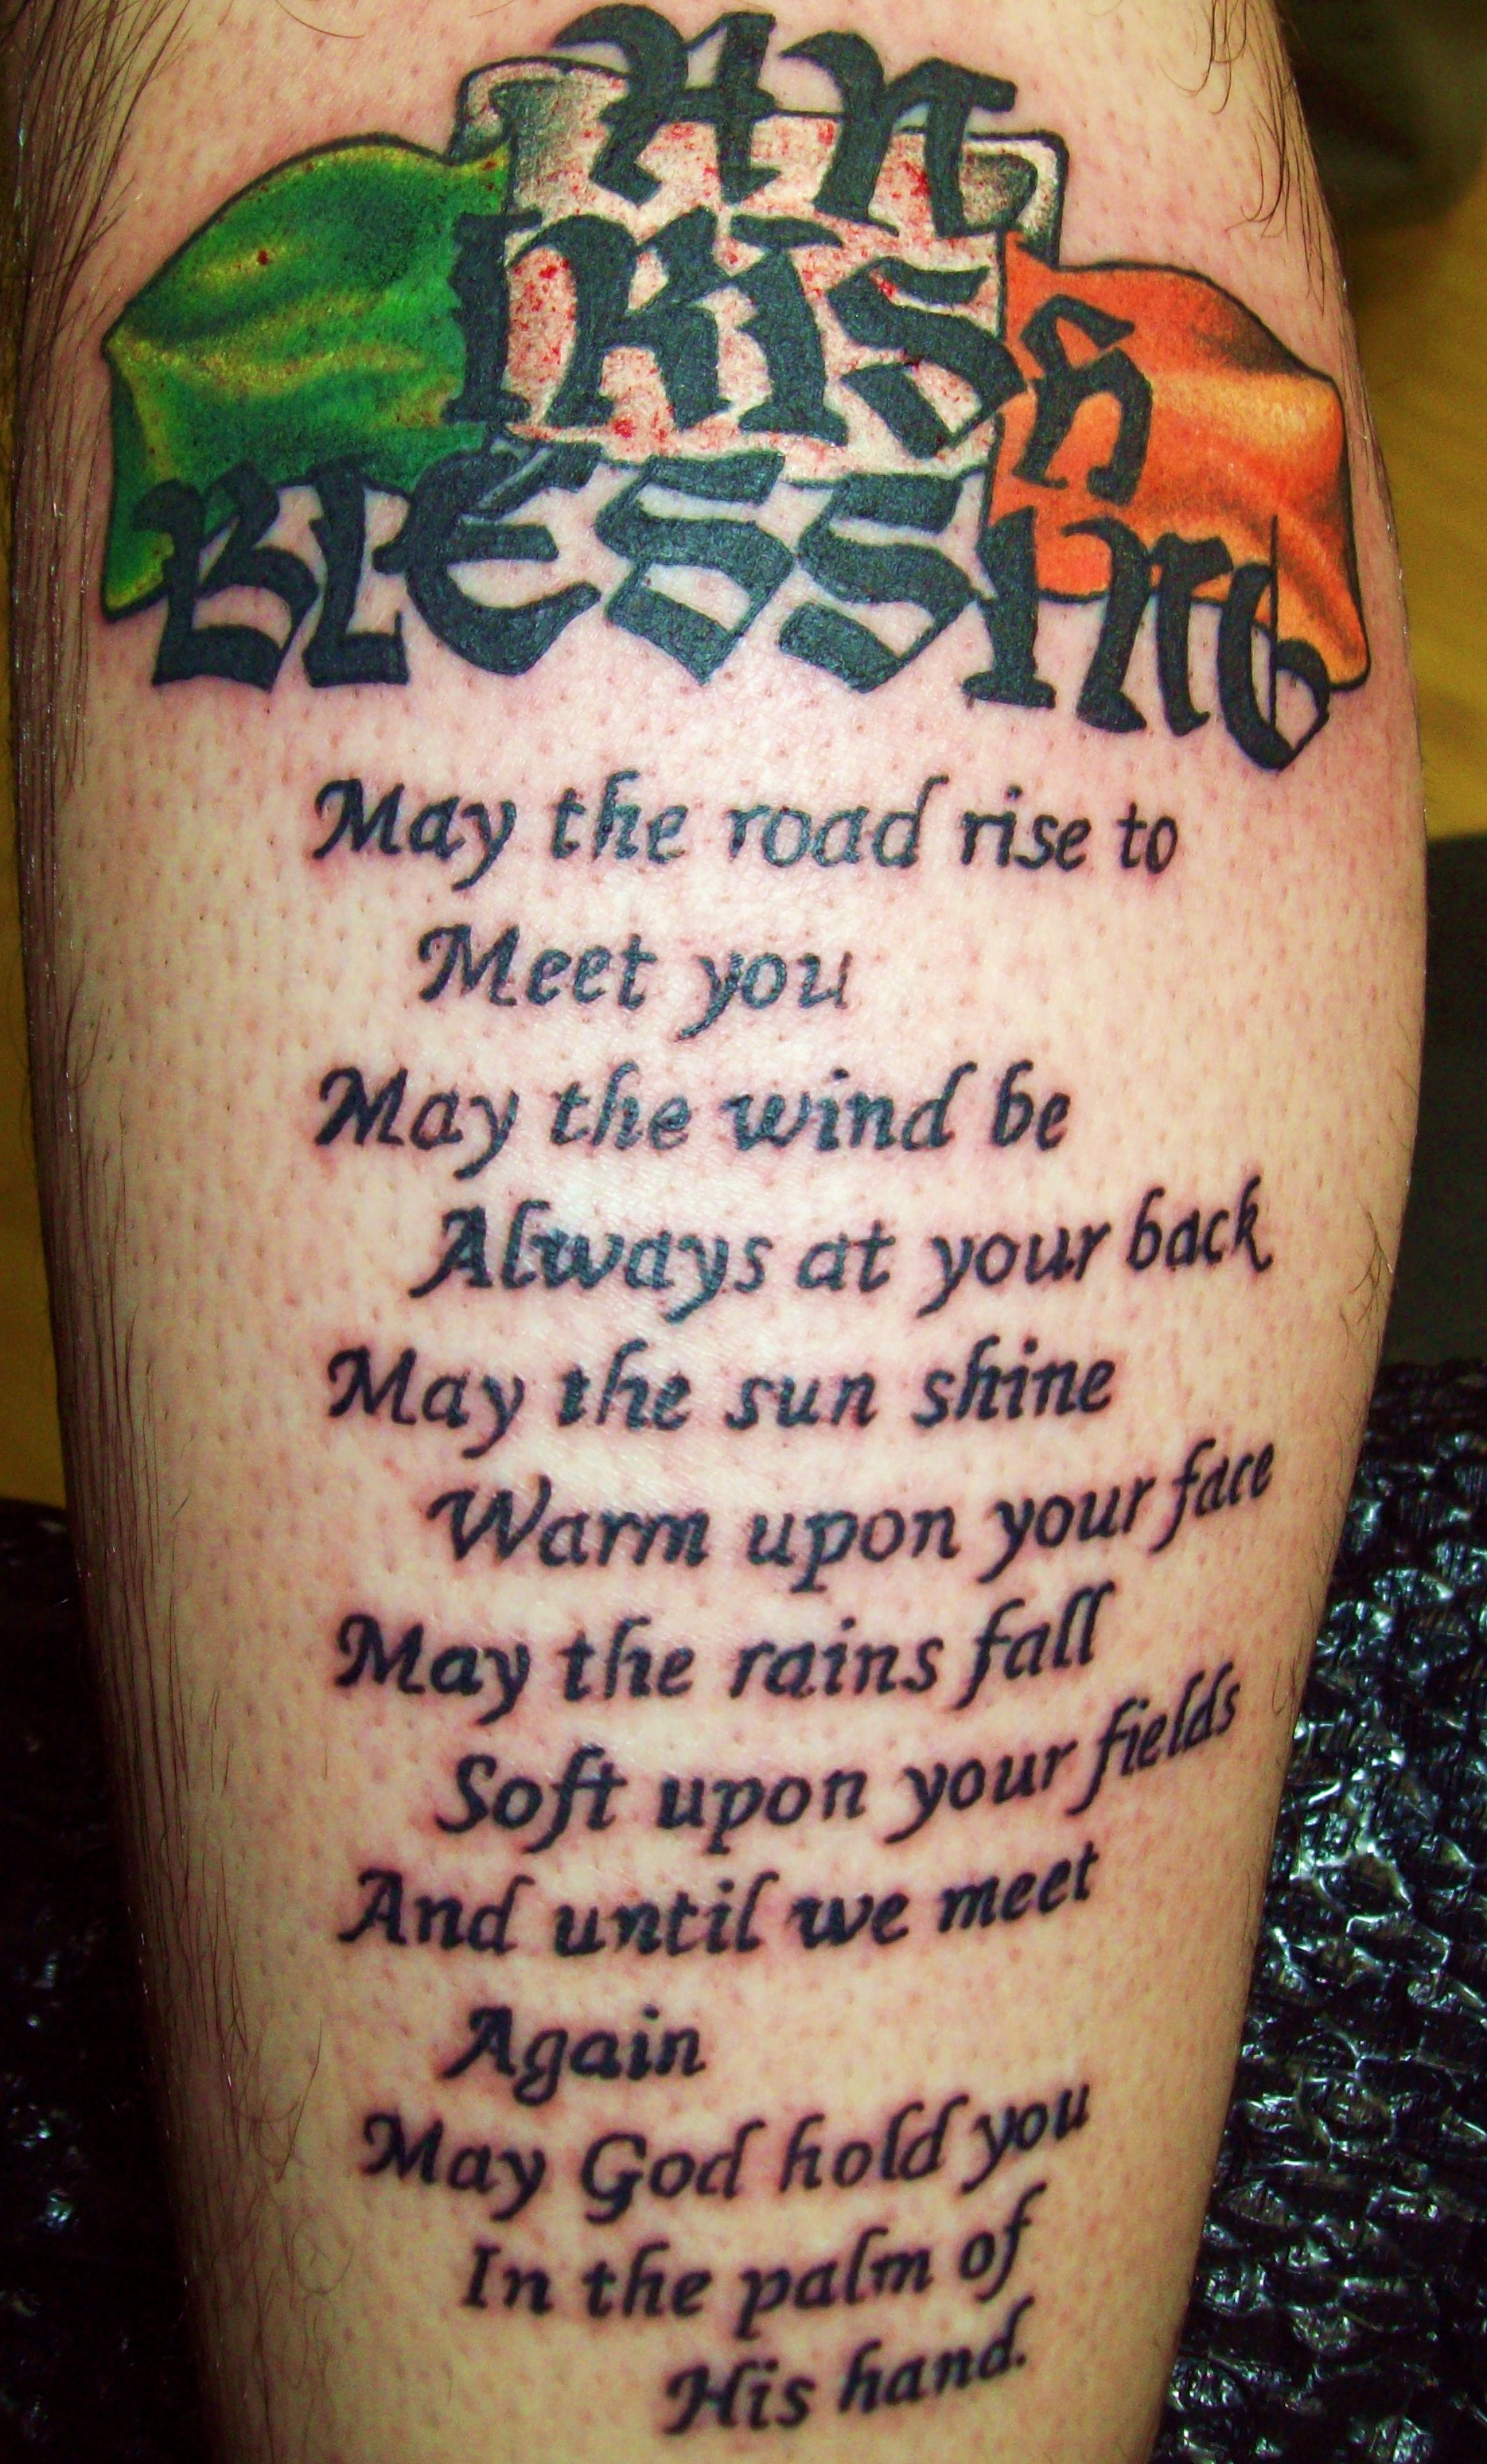 Tattoo back of the calf, i dunno he must be irish or something. It happens.